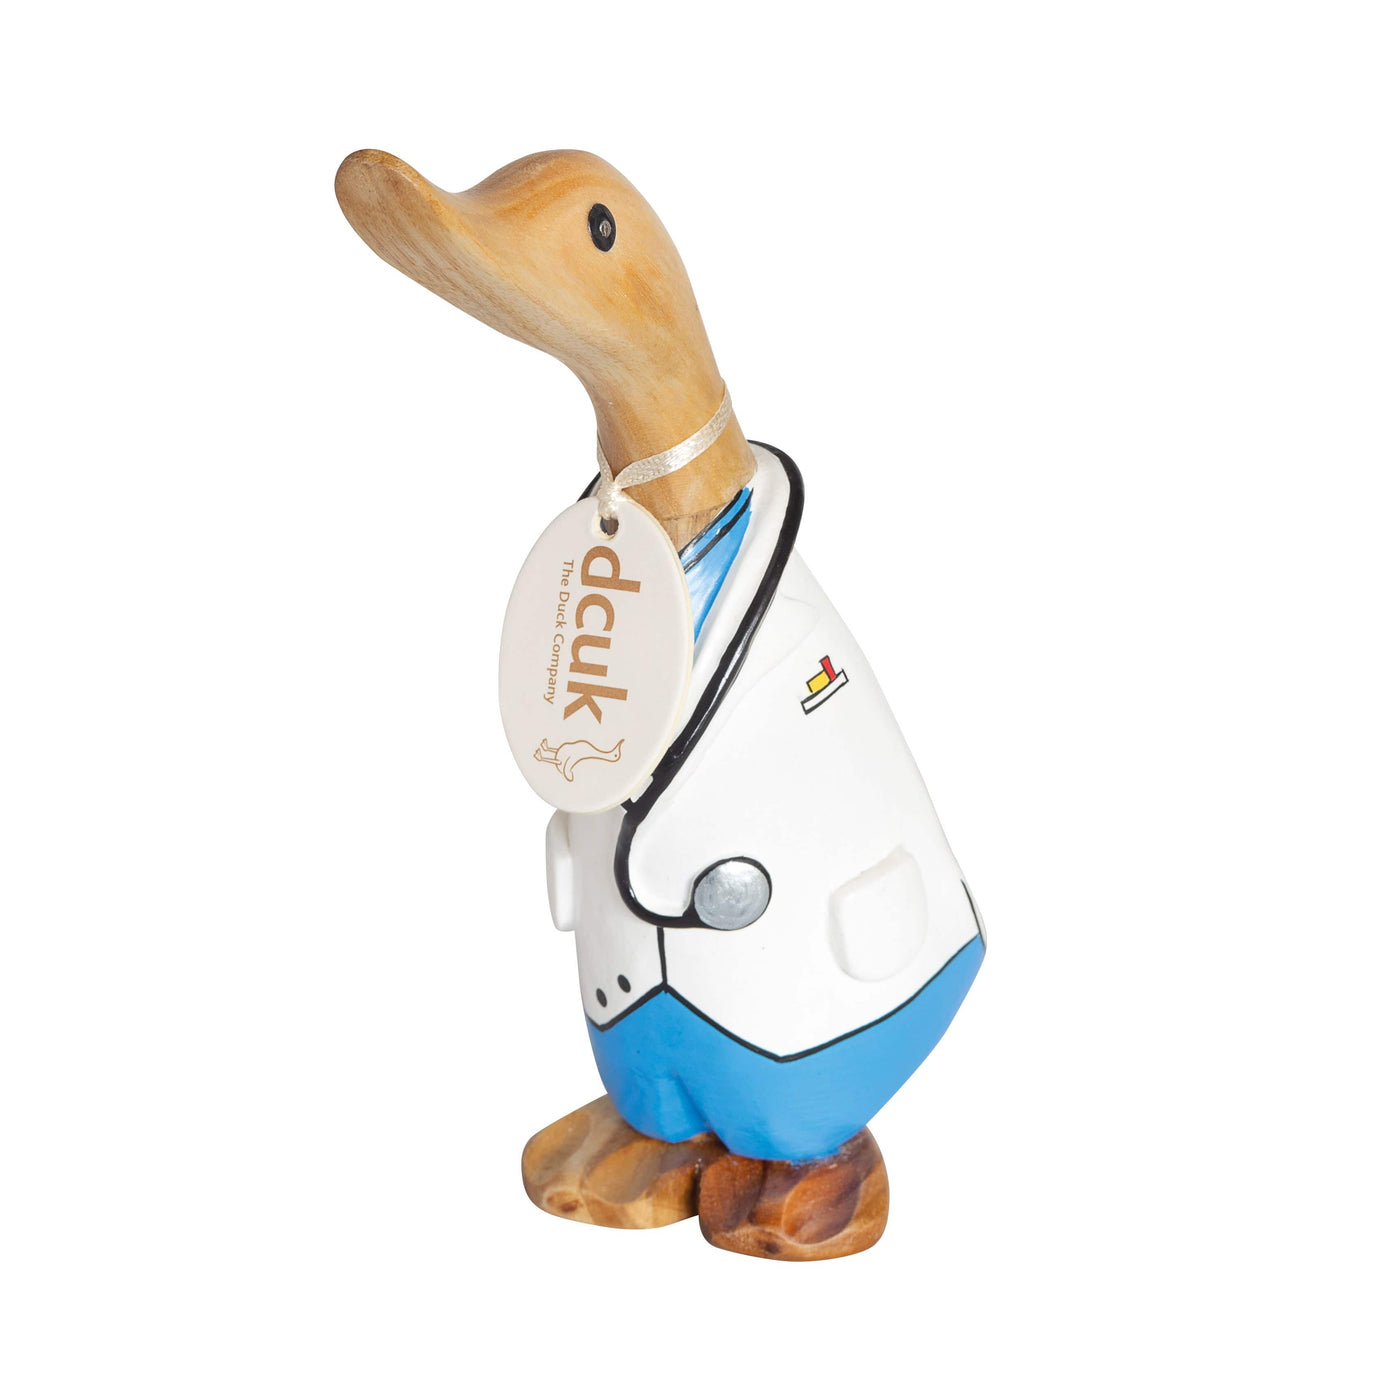 DCUK Ornaments Copy of Natural Wooden Doctor Duck Ornament